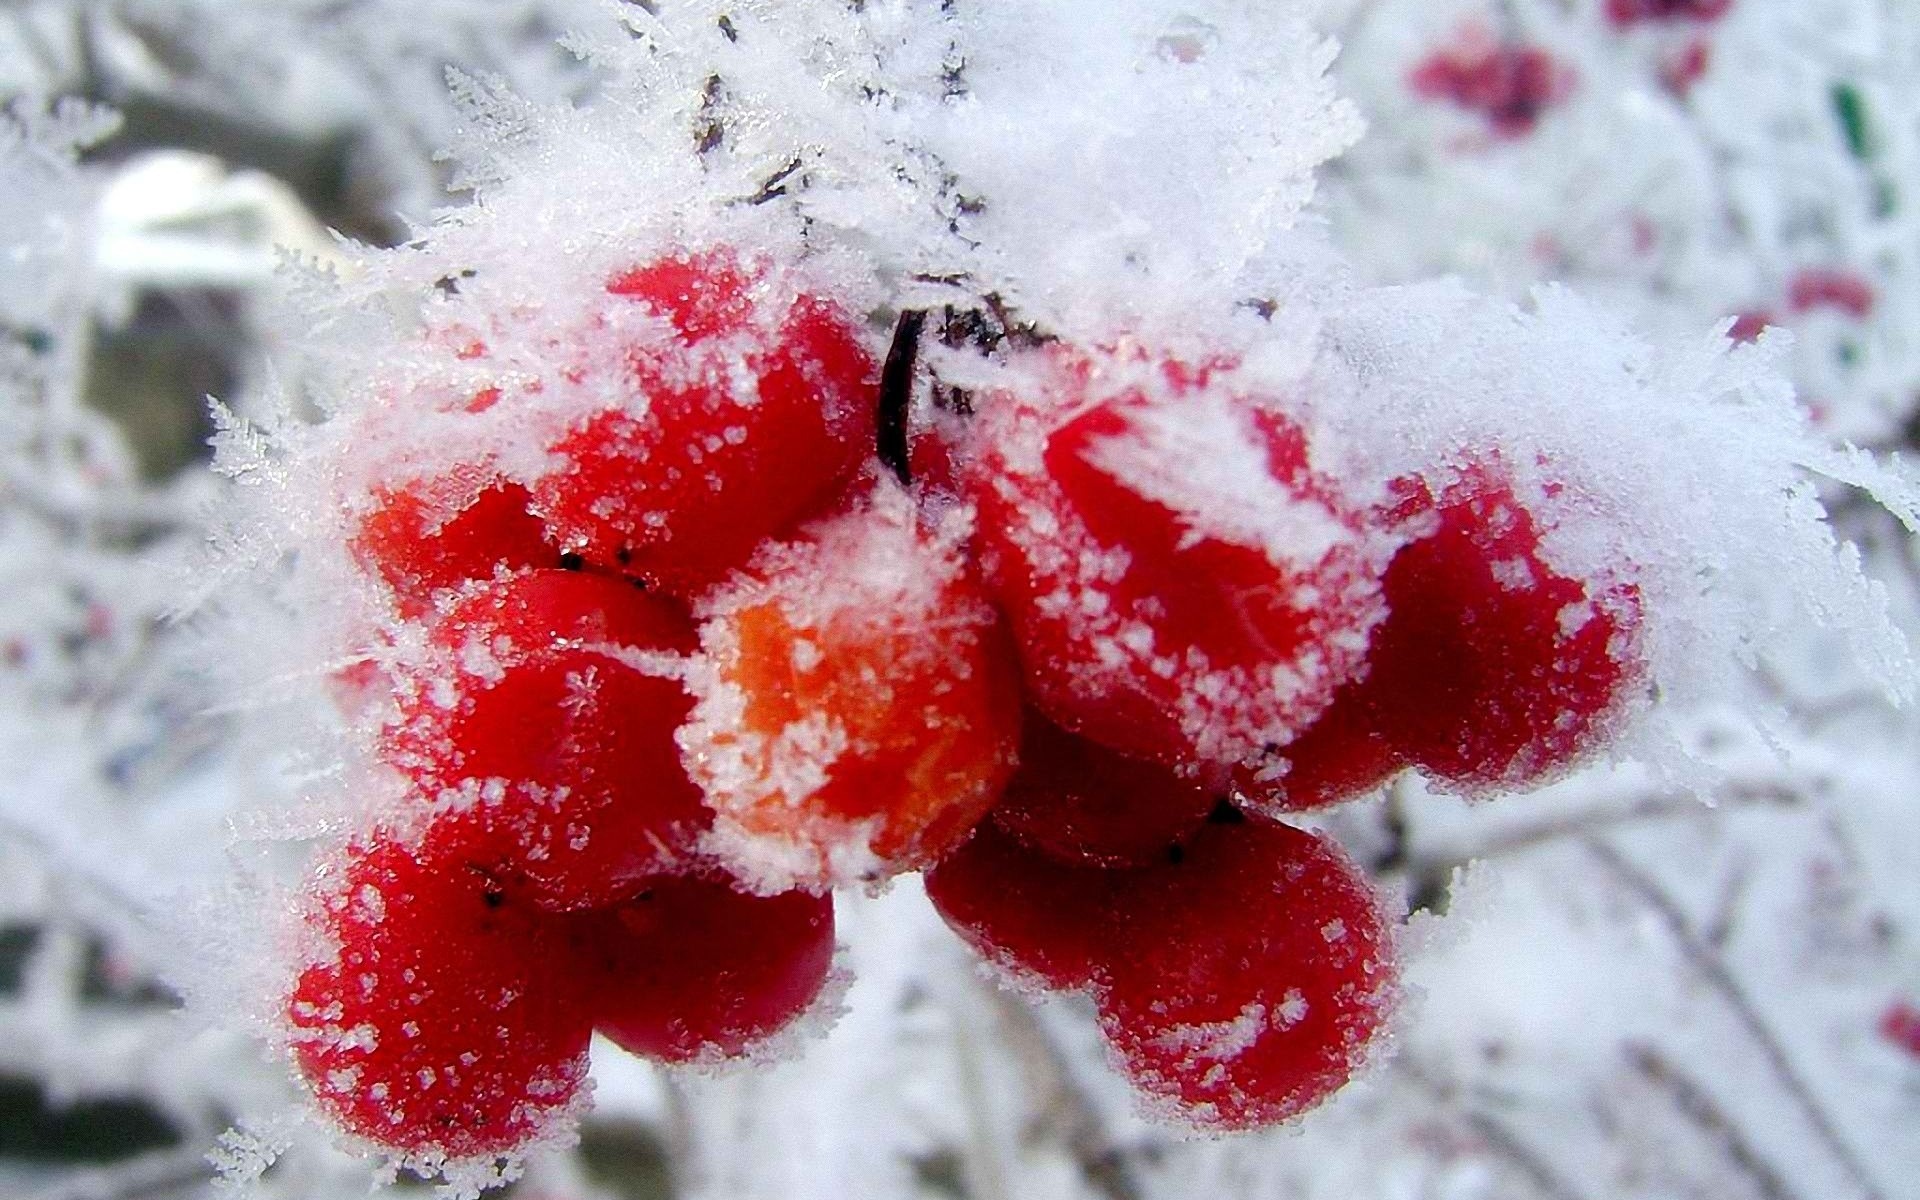 Plants: Fruits First Winter Red Cranberry Berries Nature Snow ...